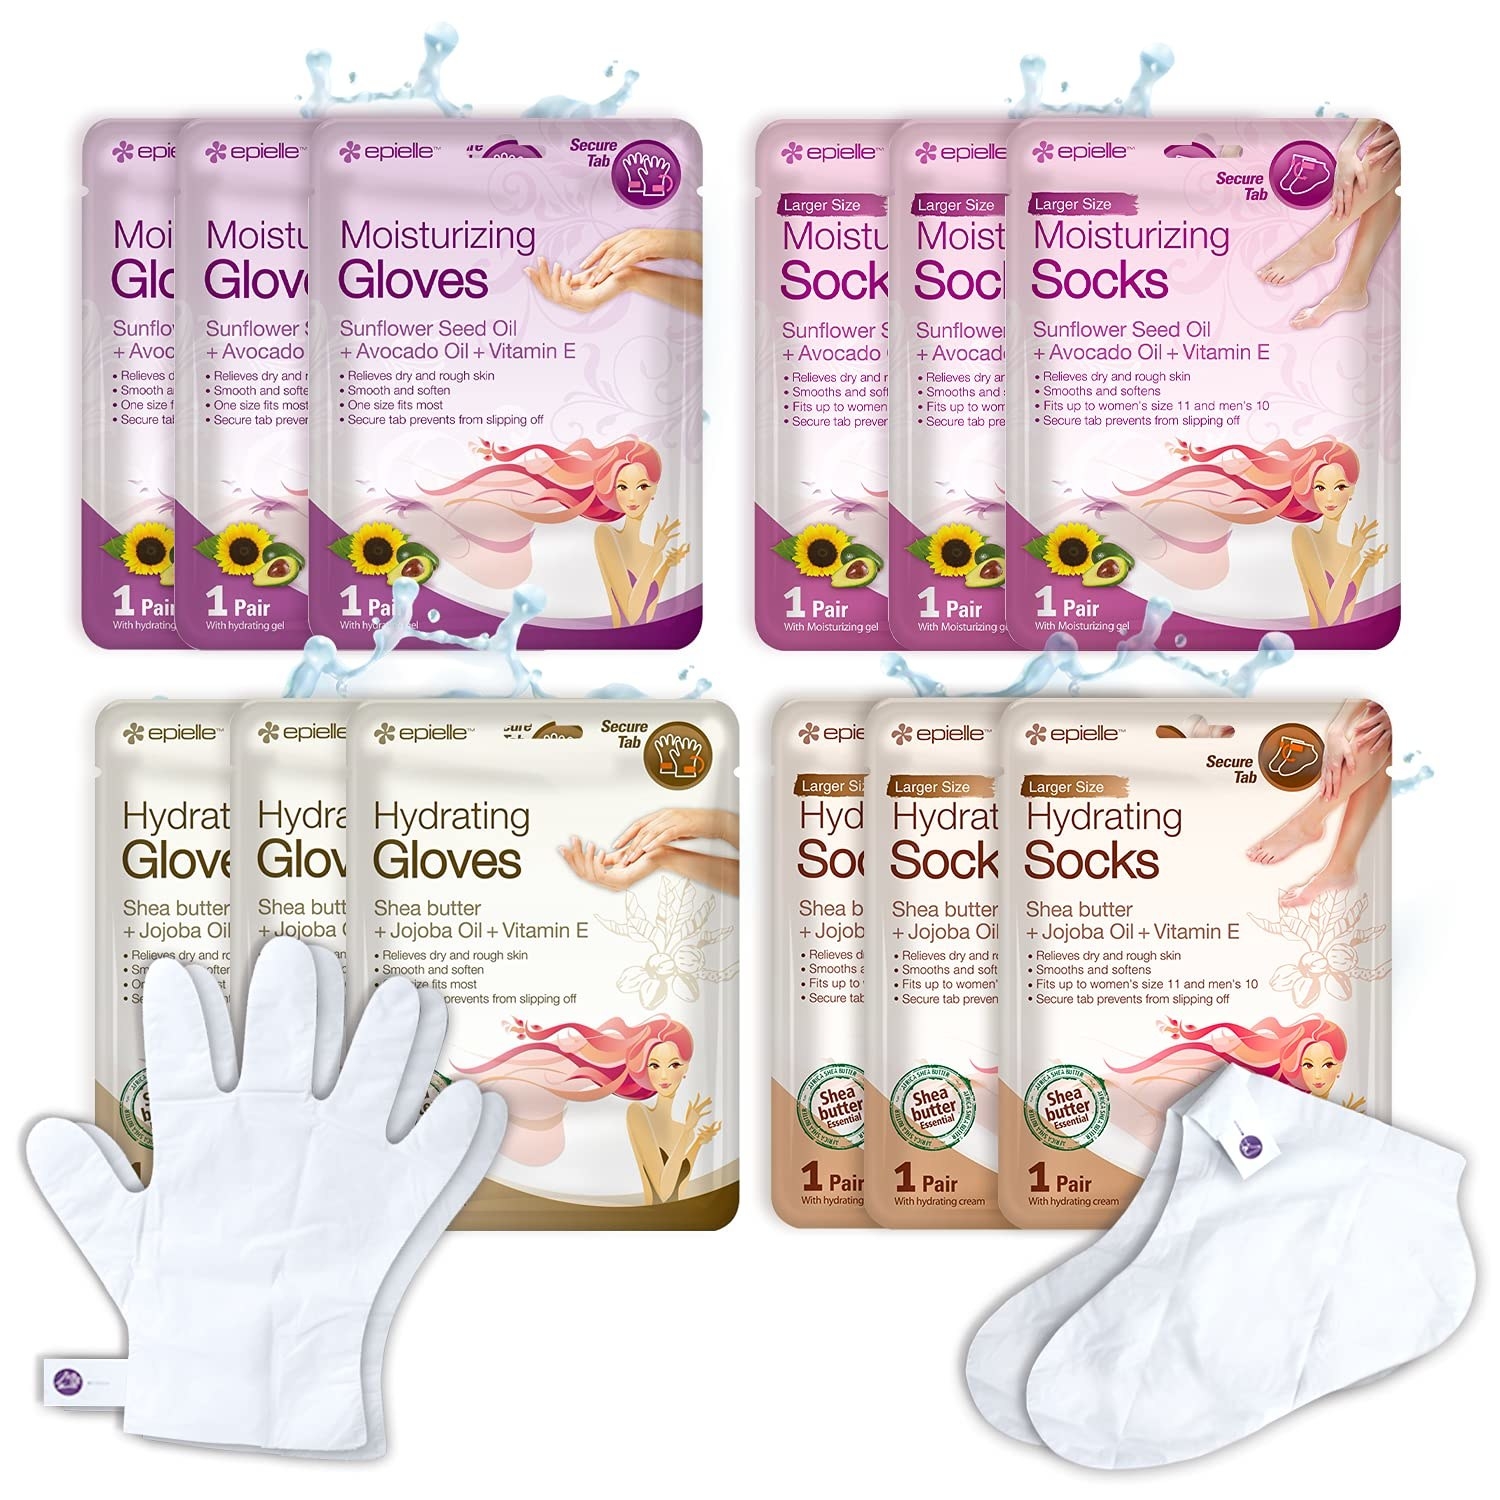 Moisturizing and hydrating socks and gloves